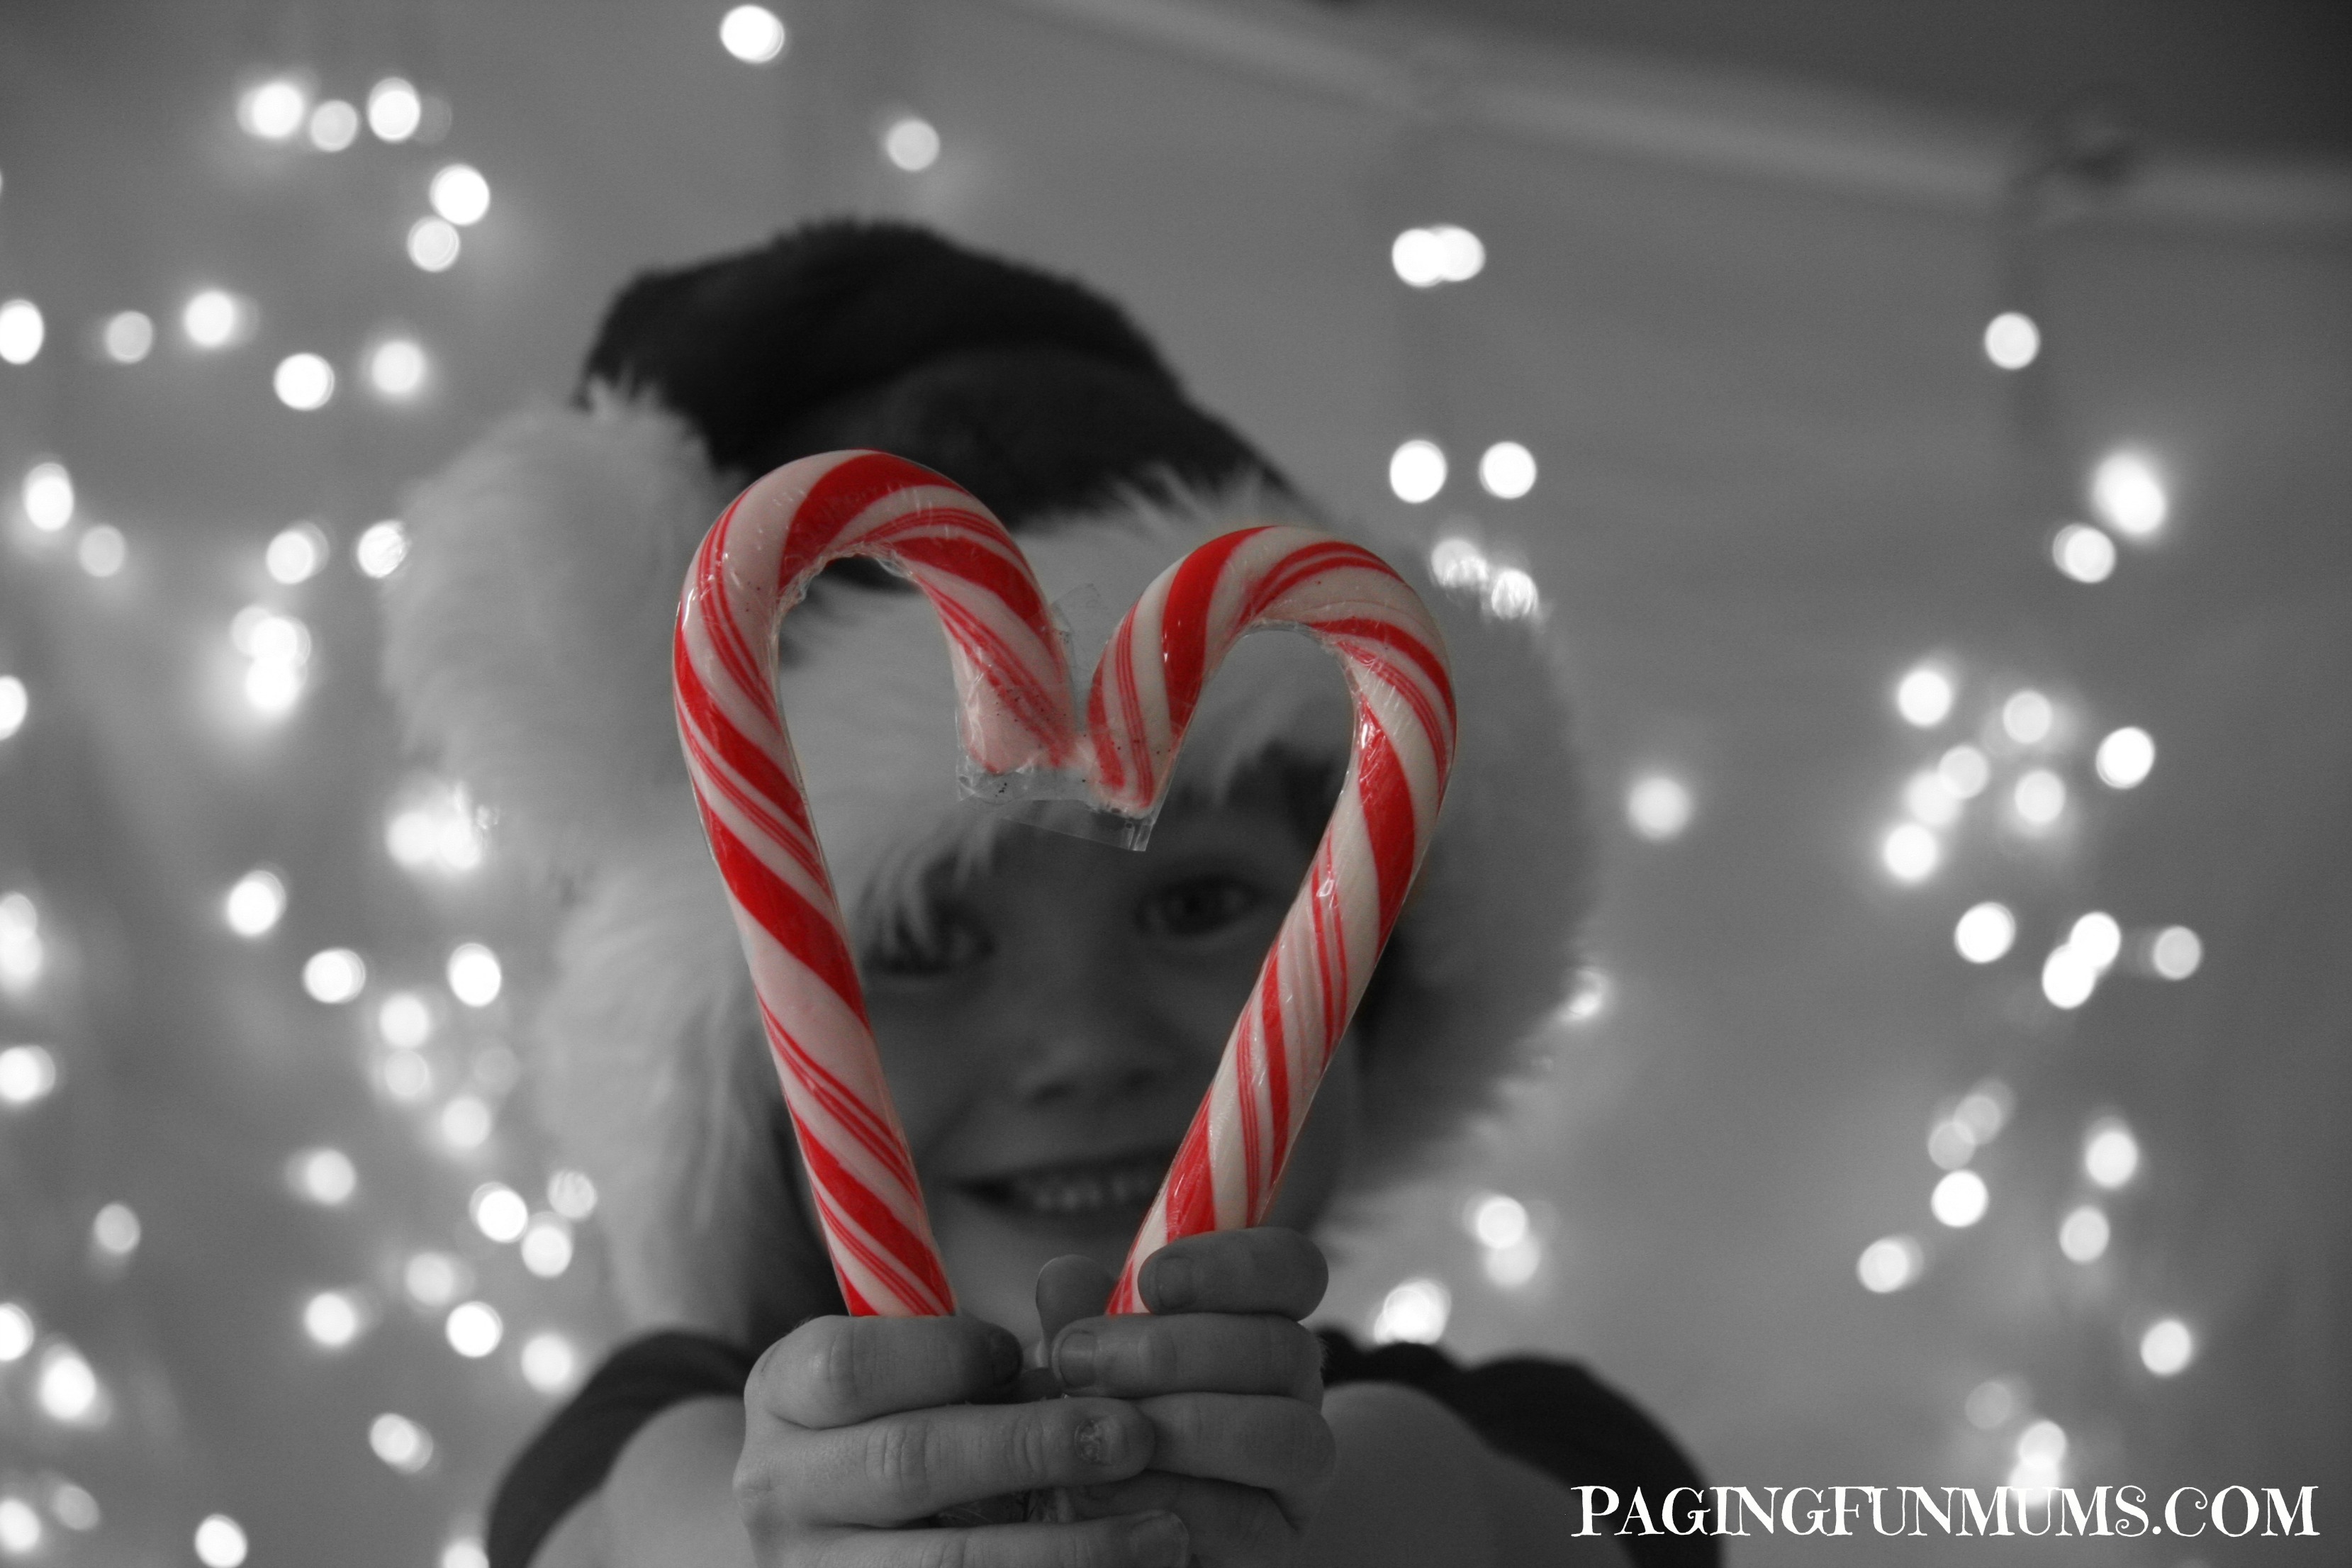 Fun Christmas Photos with Kids - Two Candy Canes make a great prop!